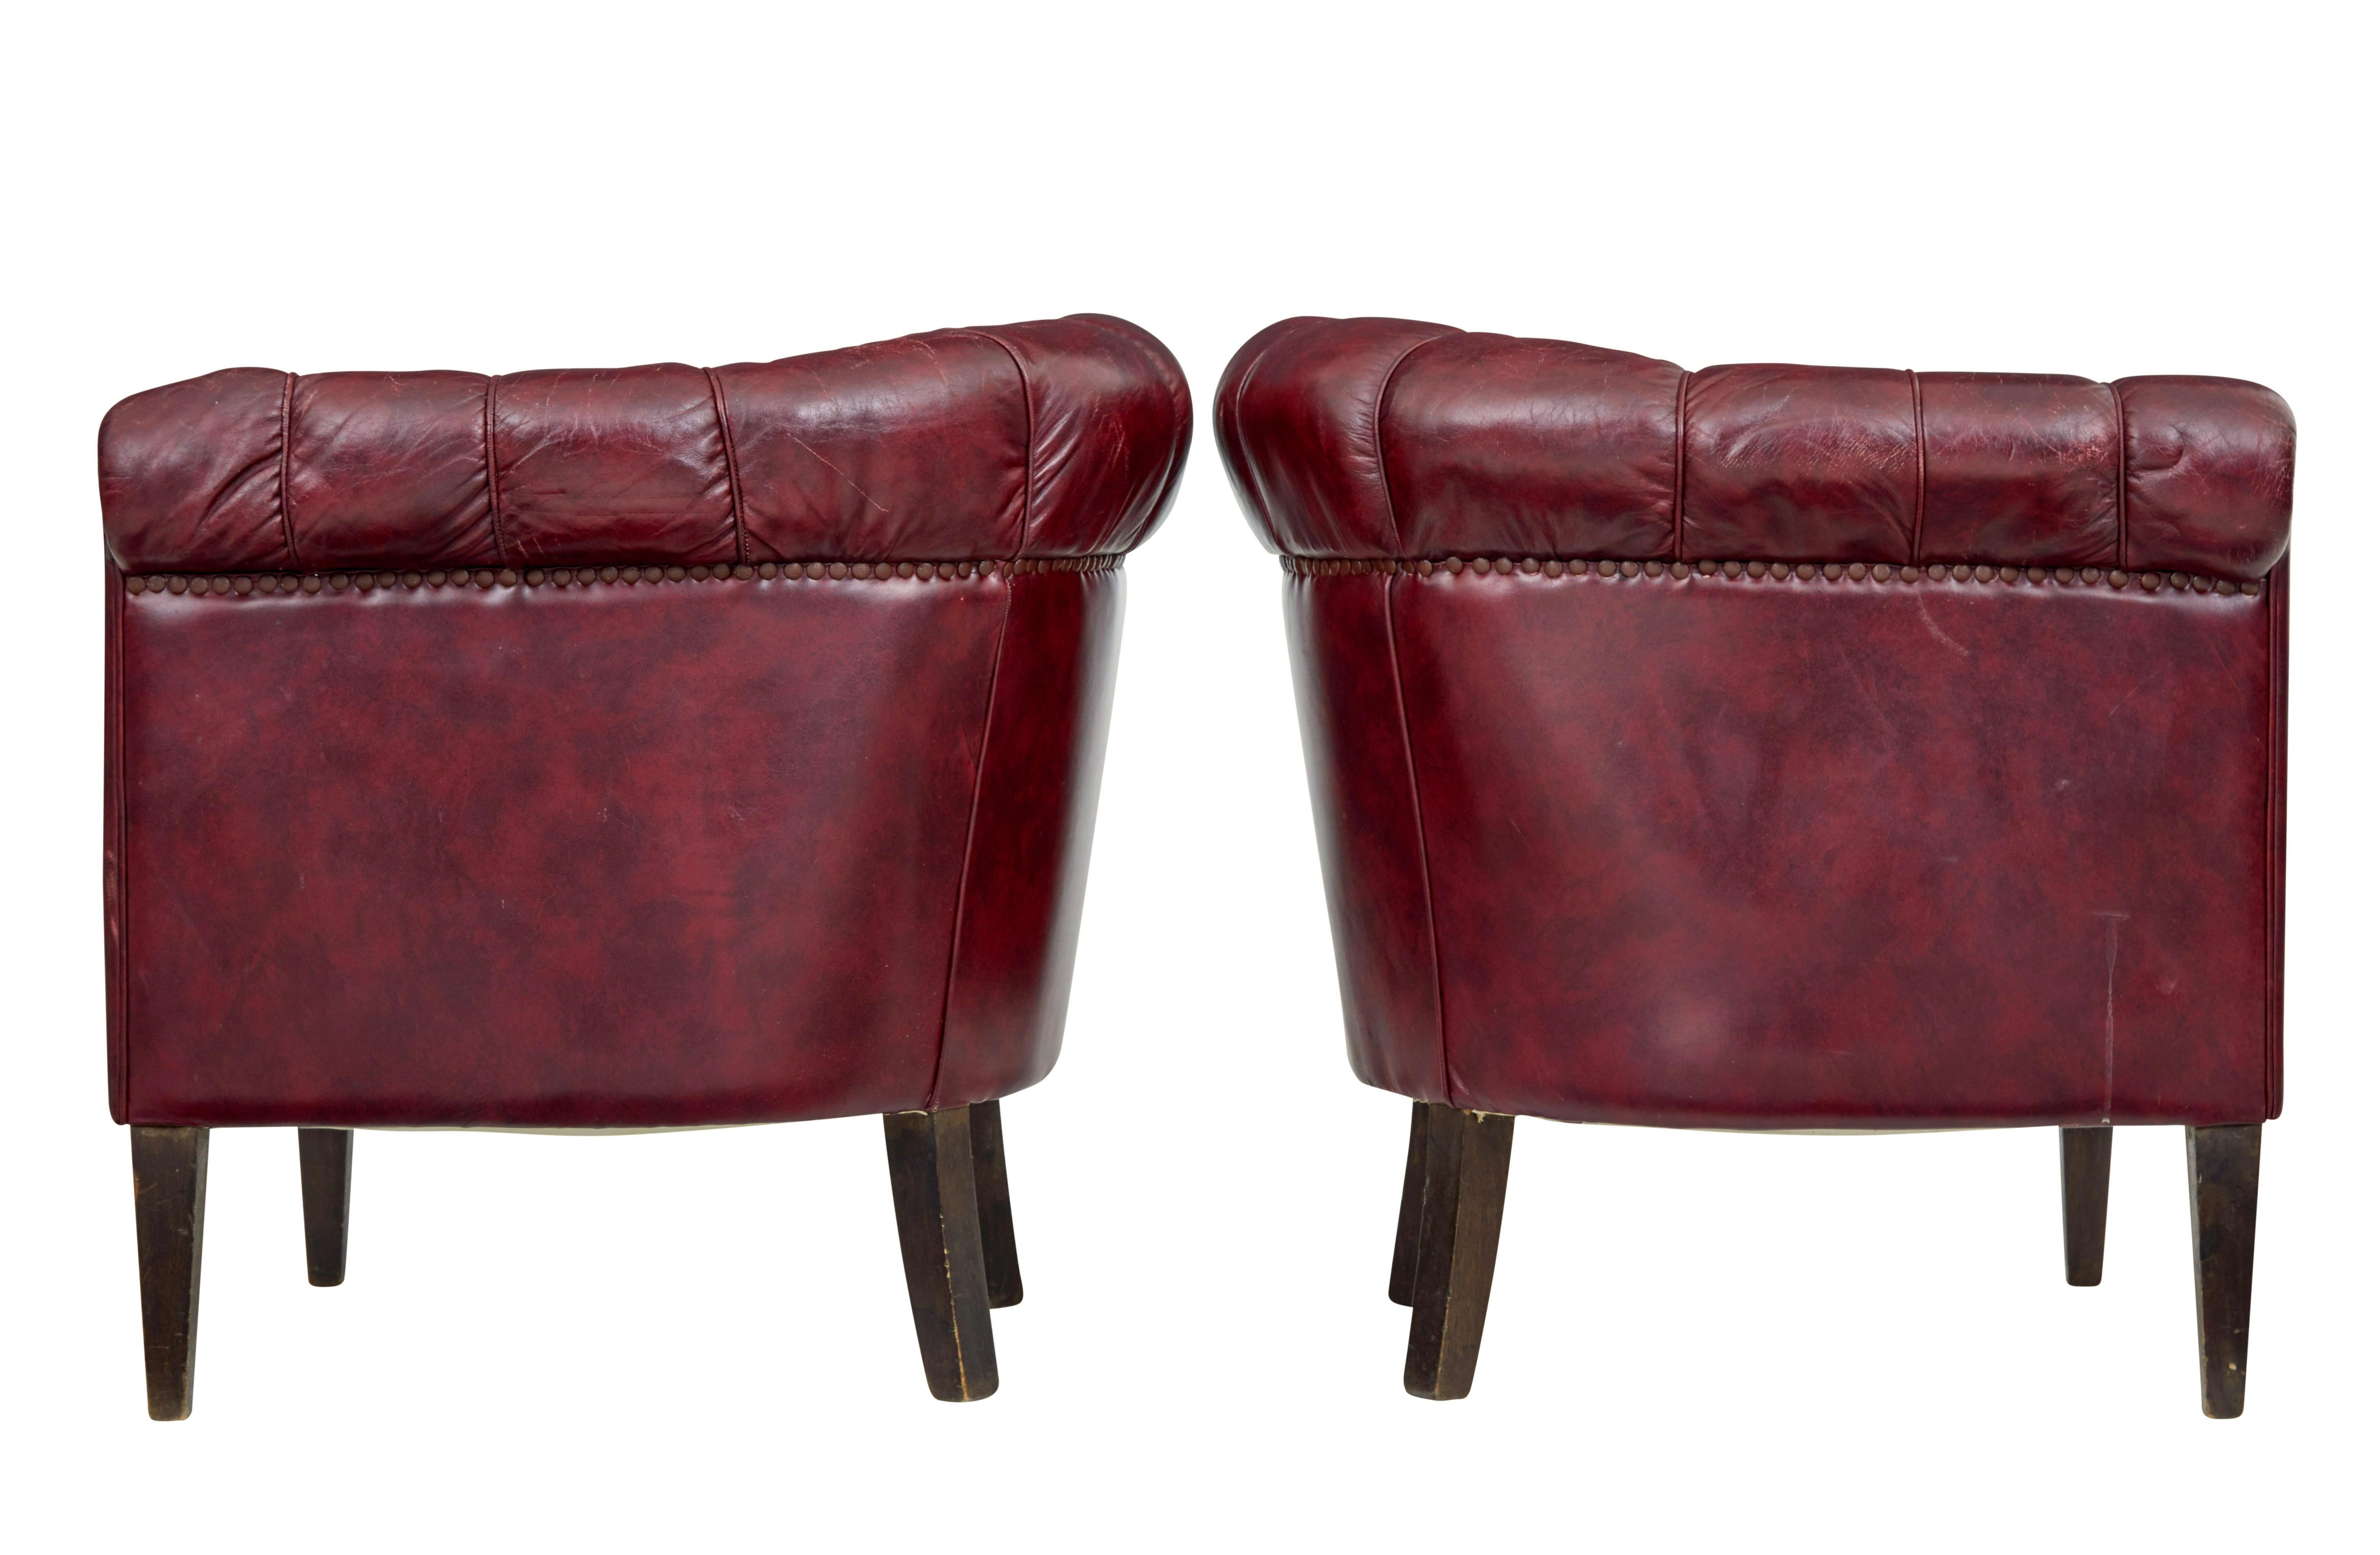 Good quality pair of leather armchairs circa 1950.

Over stuffed arms and button back design make these a very comfortable pair of chairs.  Deep red leather arranged with piping and button work.

Leather in very good condition for age with very